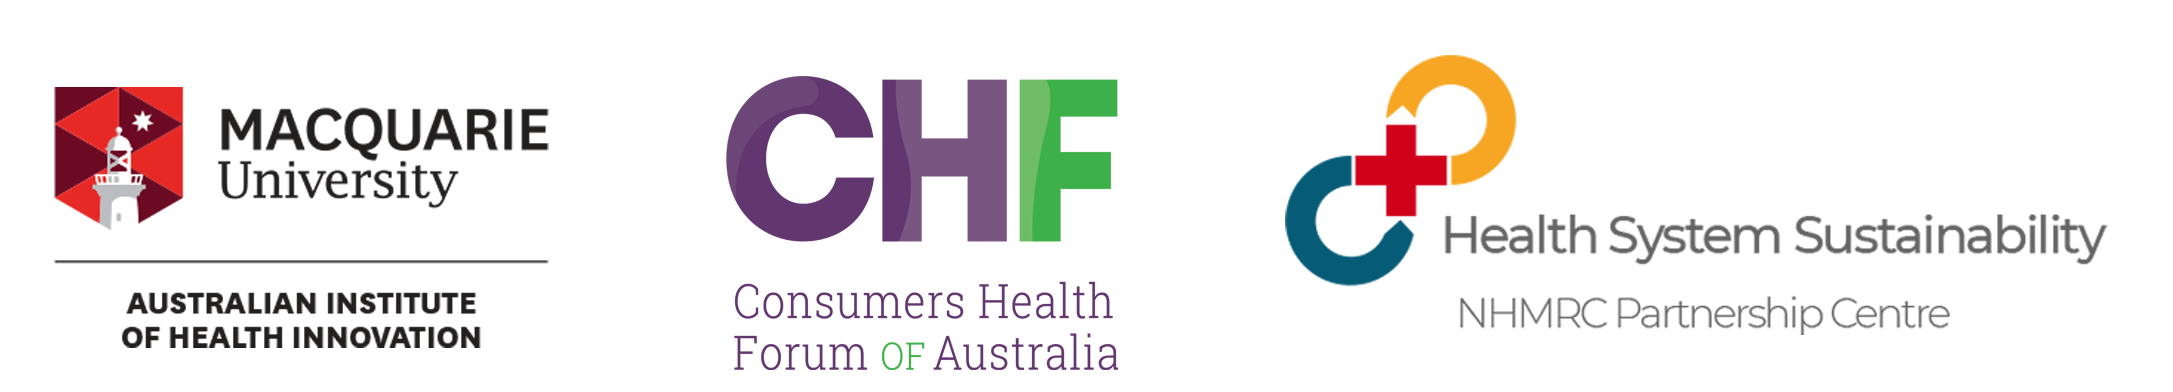 Logos for Macquarie University, consumers Health Forum and Health System Sustainability 